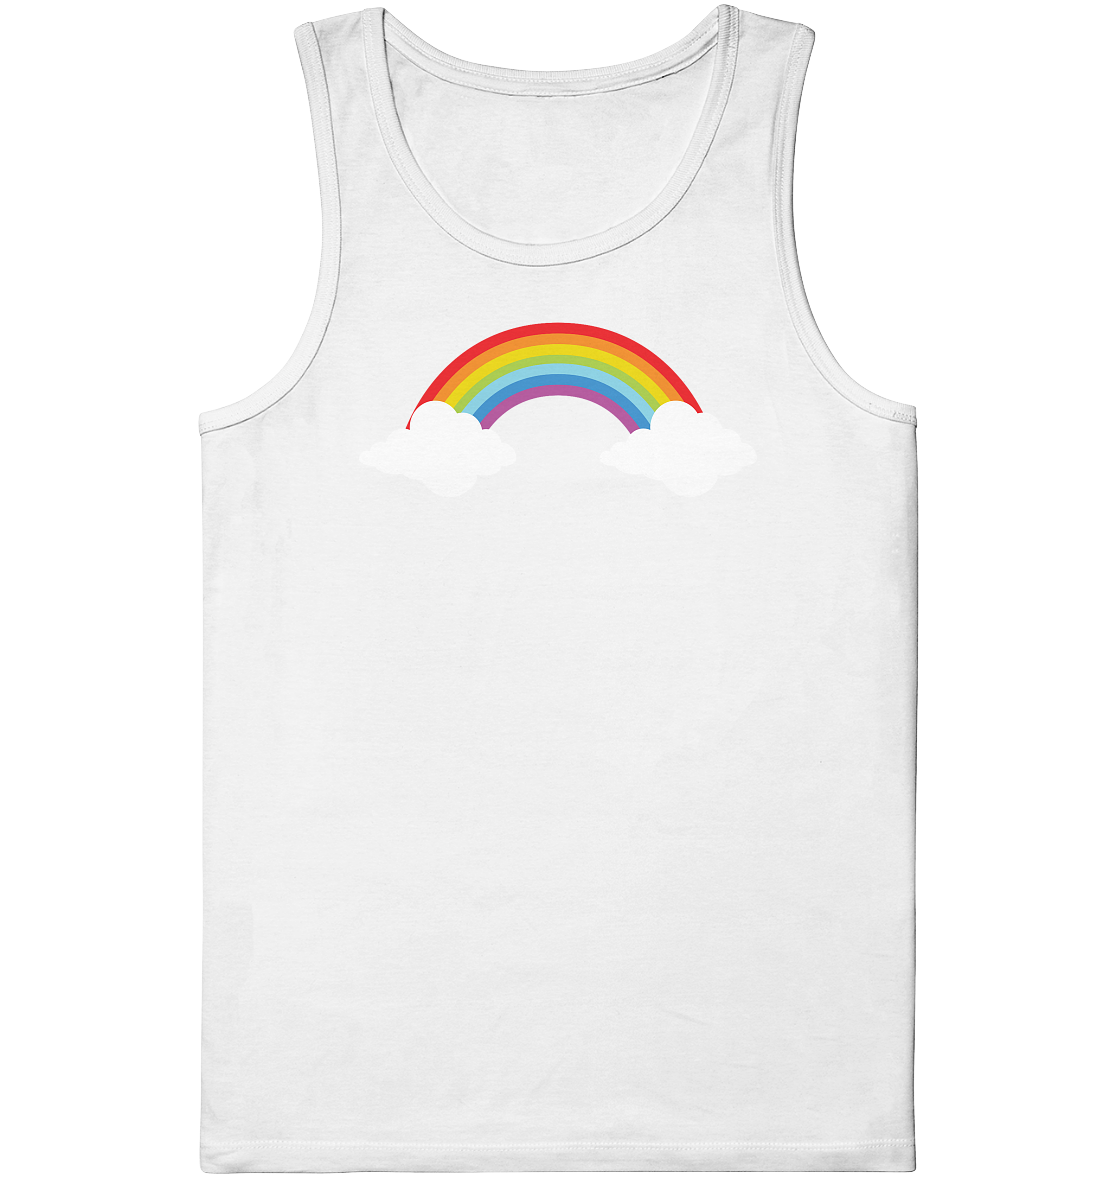 Rainbow with clouds - organic tank top